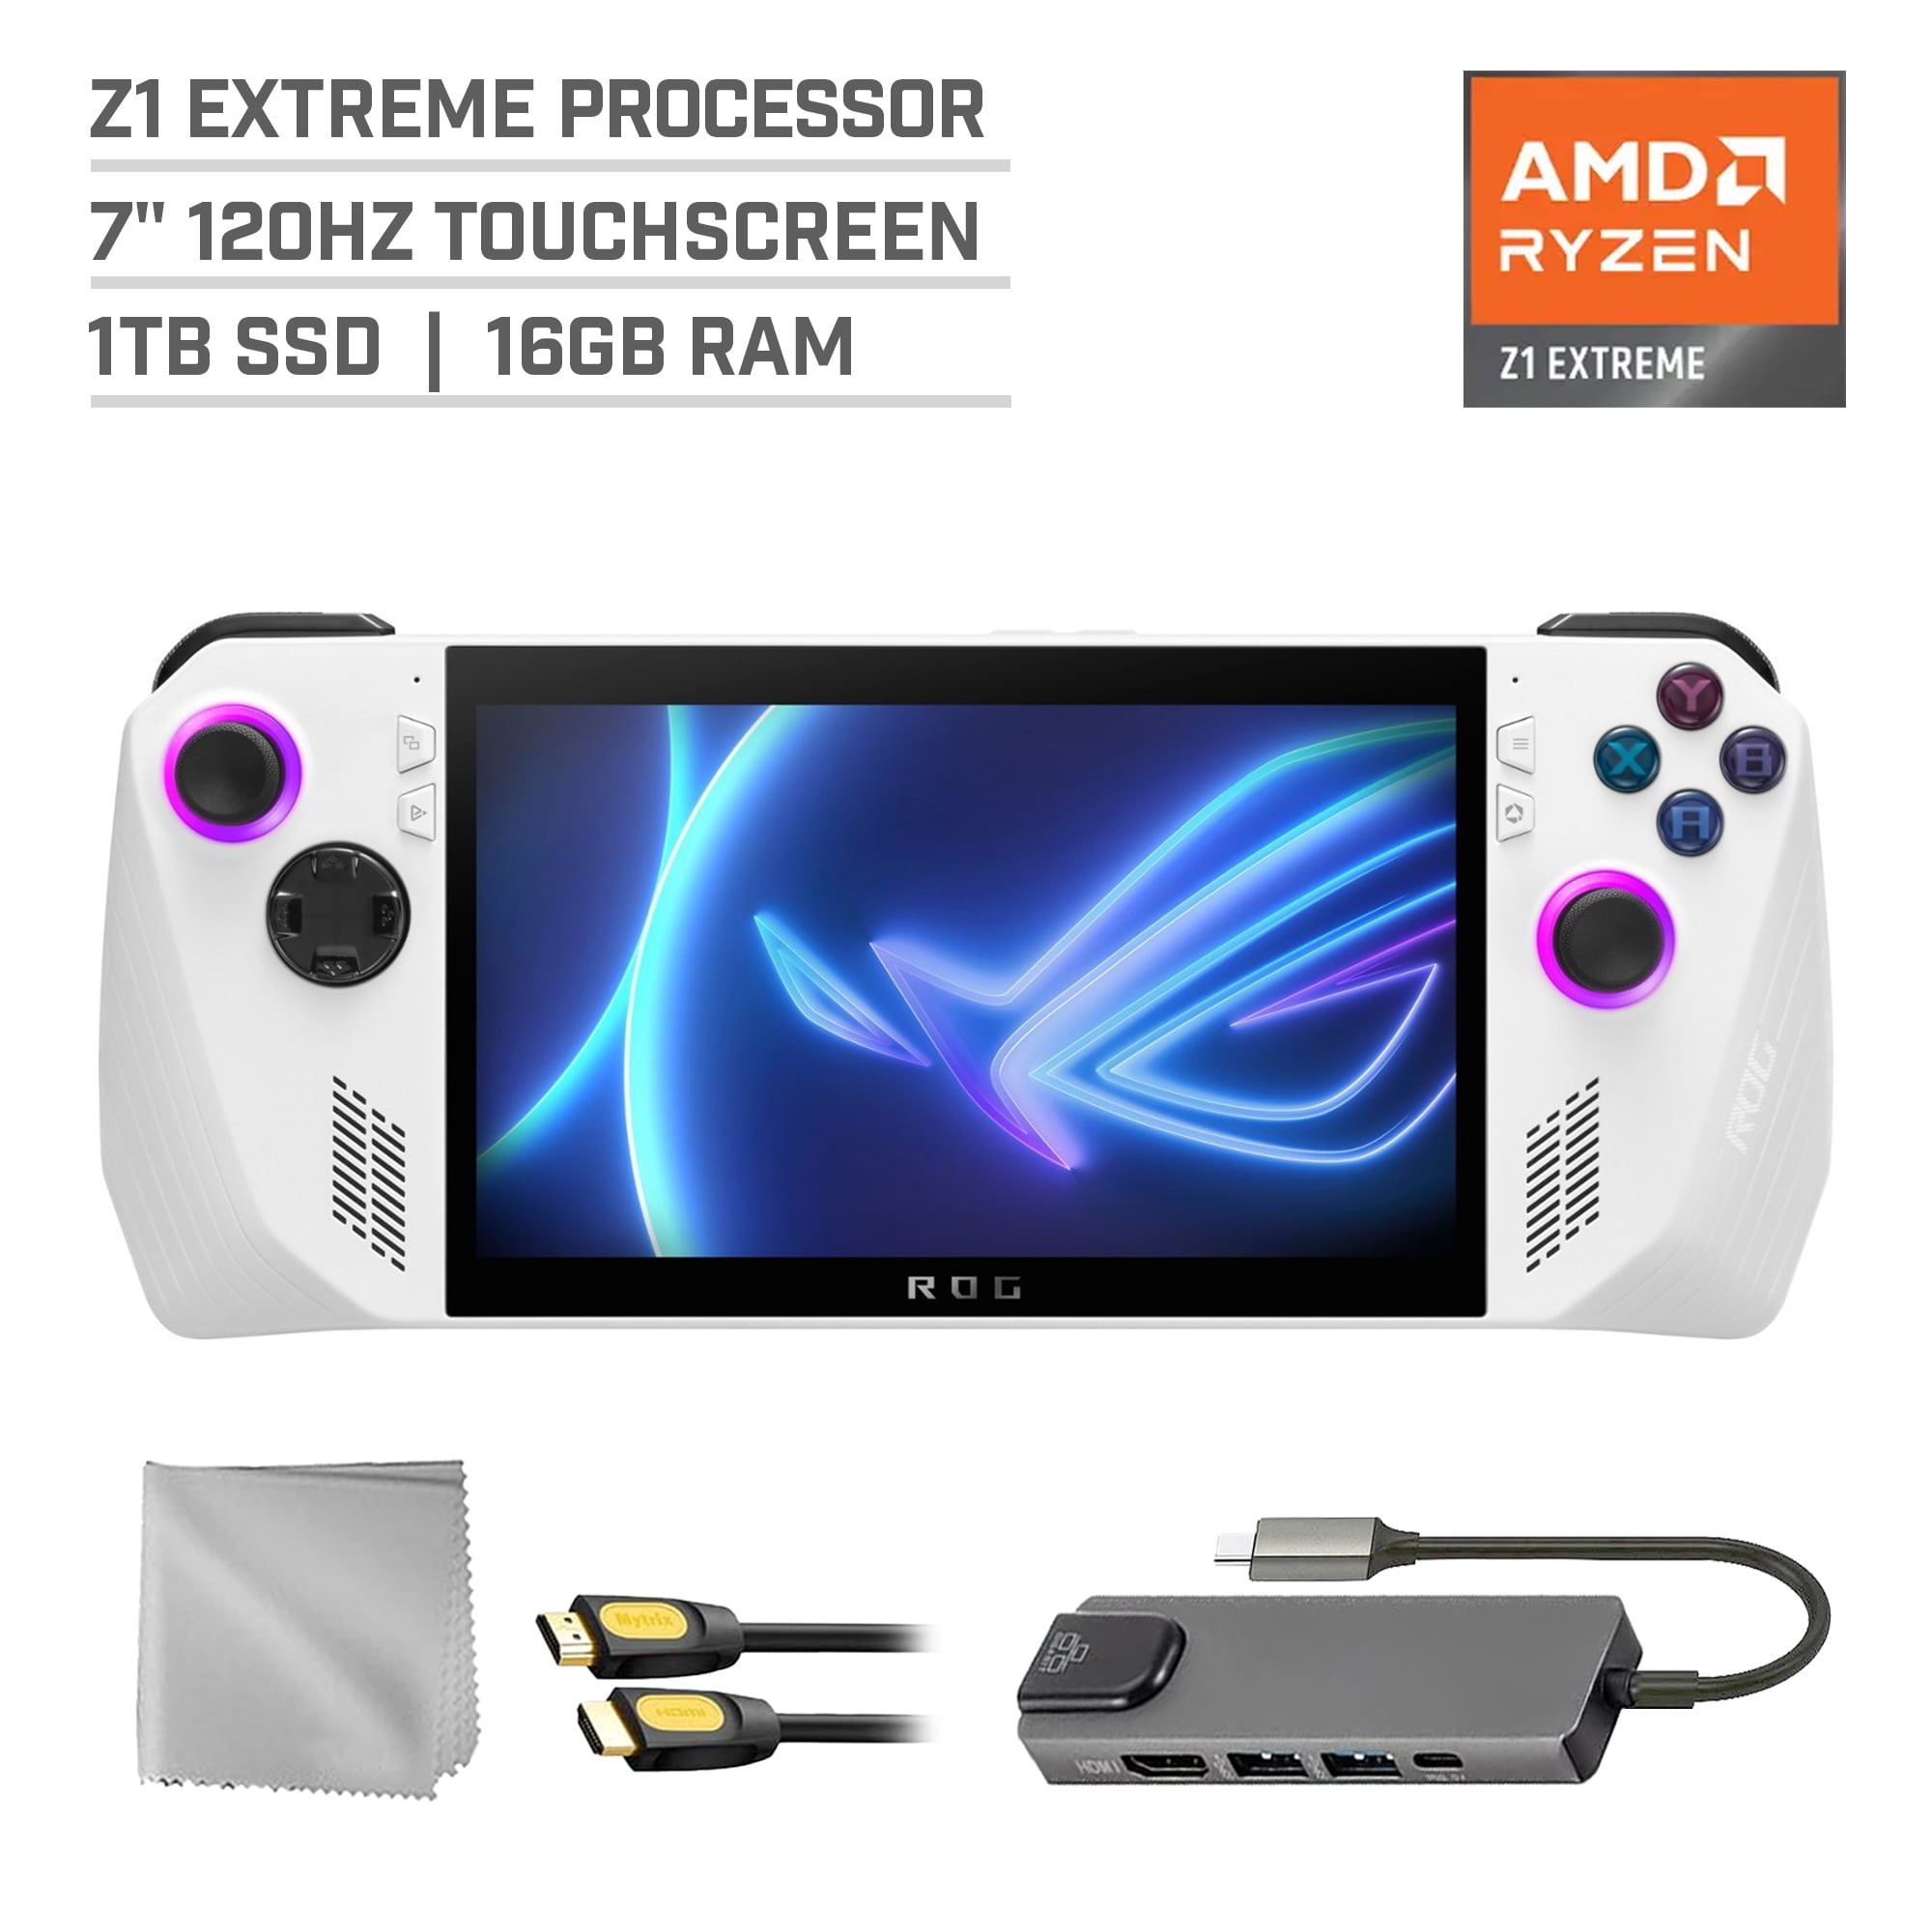 ASUS ROG Ally 7 Gaming Handheld, AMD Ryzen Z1 Extreme Processor, 120Hz FHD  IPS 1080p, 1TB, Windows 11 Home, White, with MTC 3pc Accessories Bundle